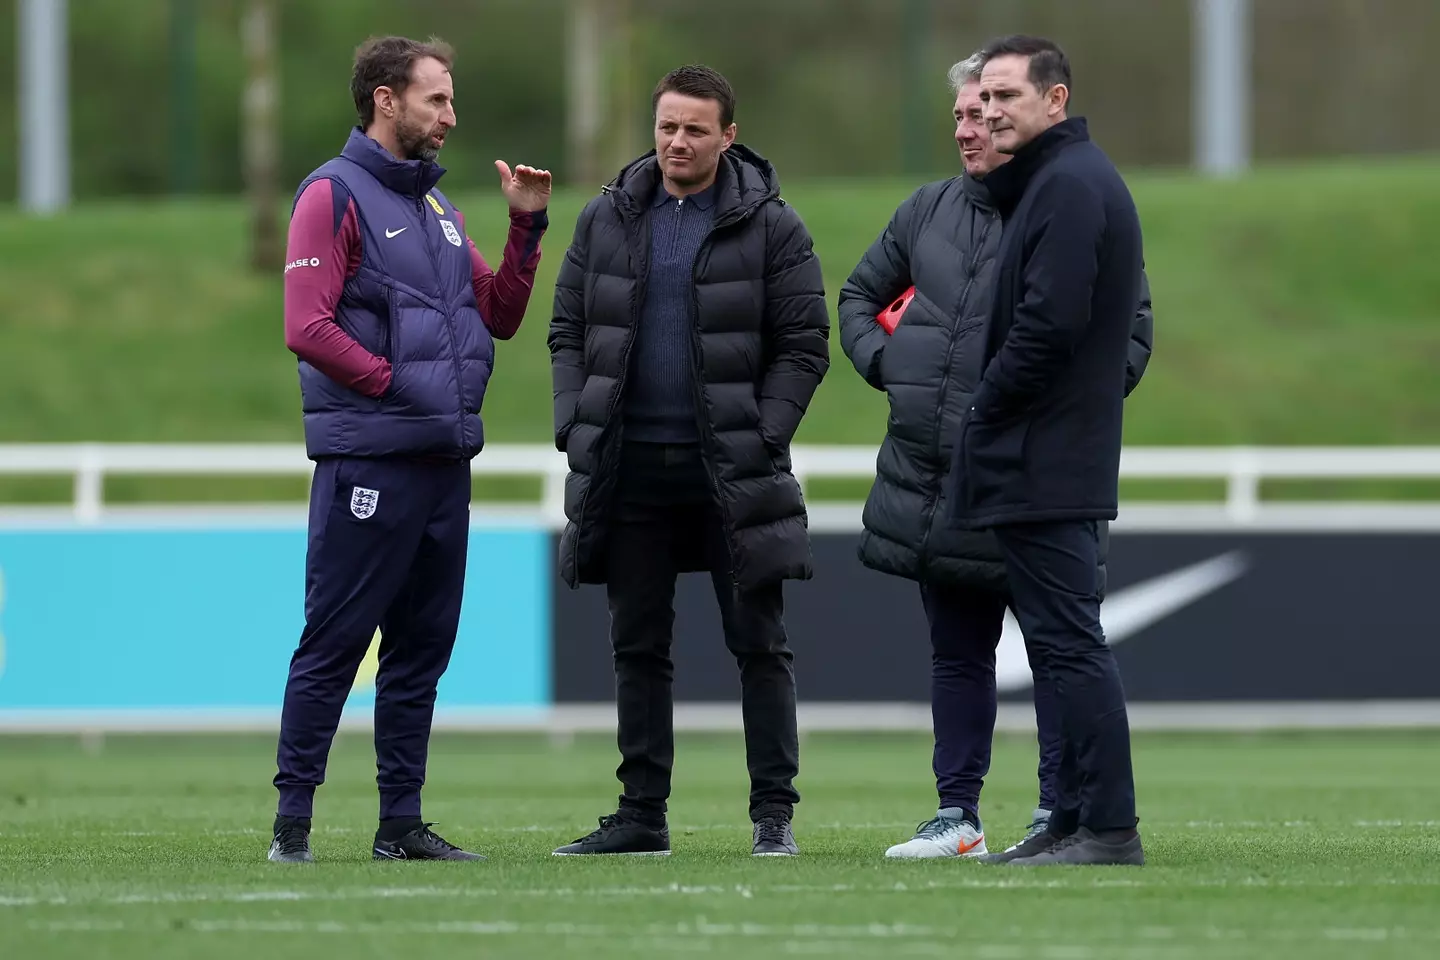 Frank Lampard was spotted in England training last month (Getty)